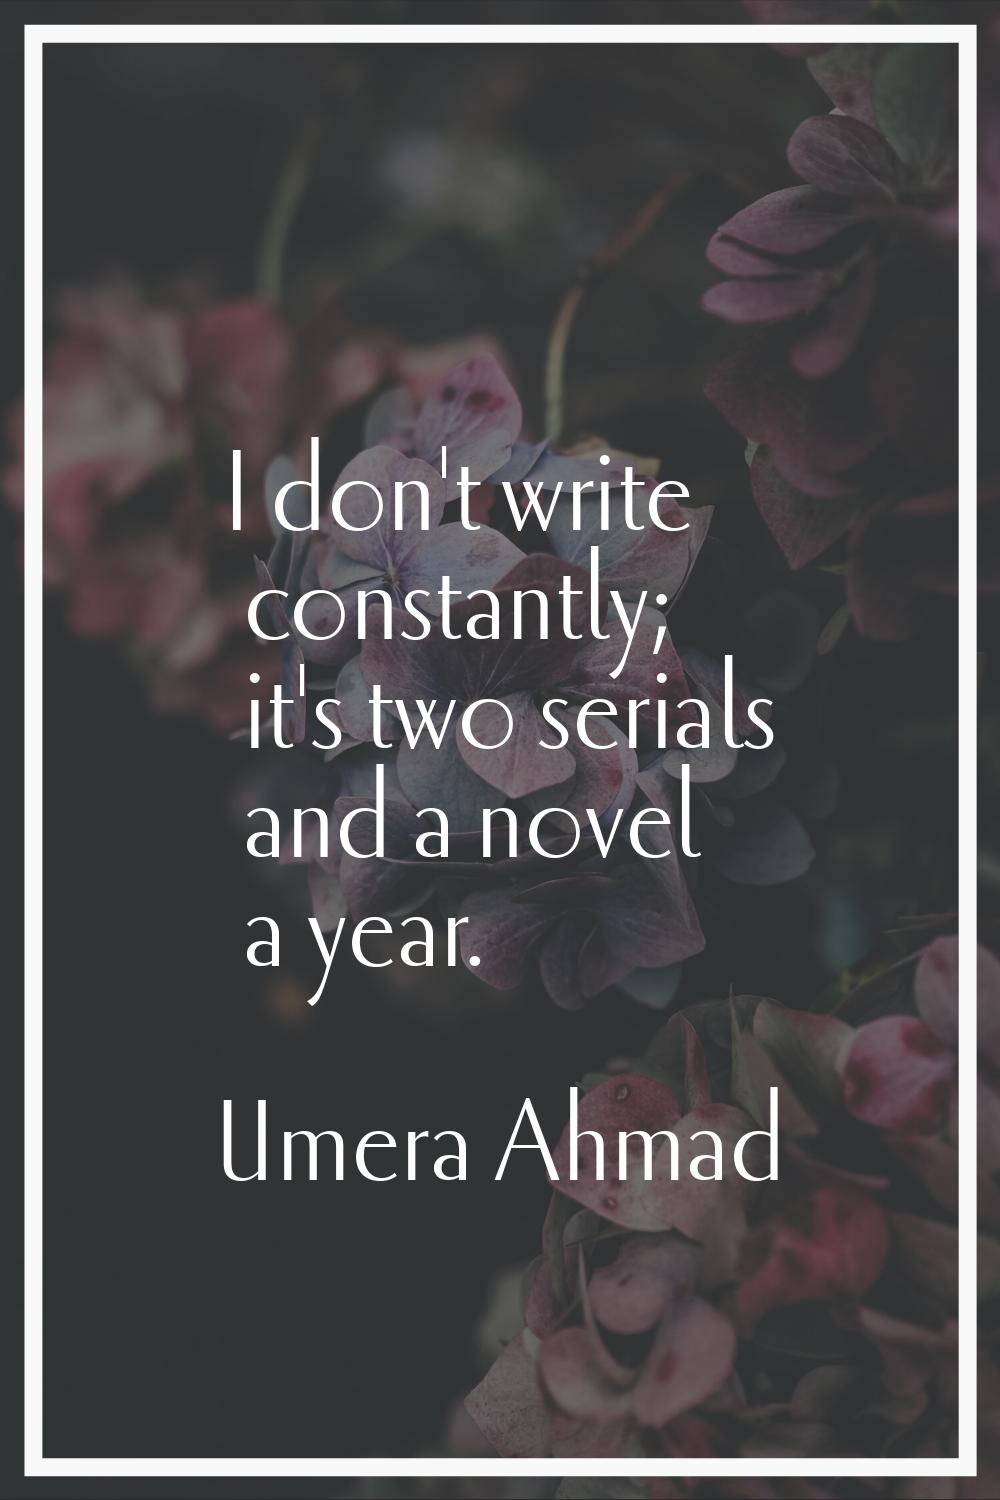 I don't write constantly; it's two serials and a novel a year.